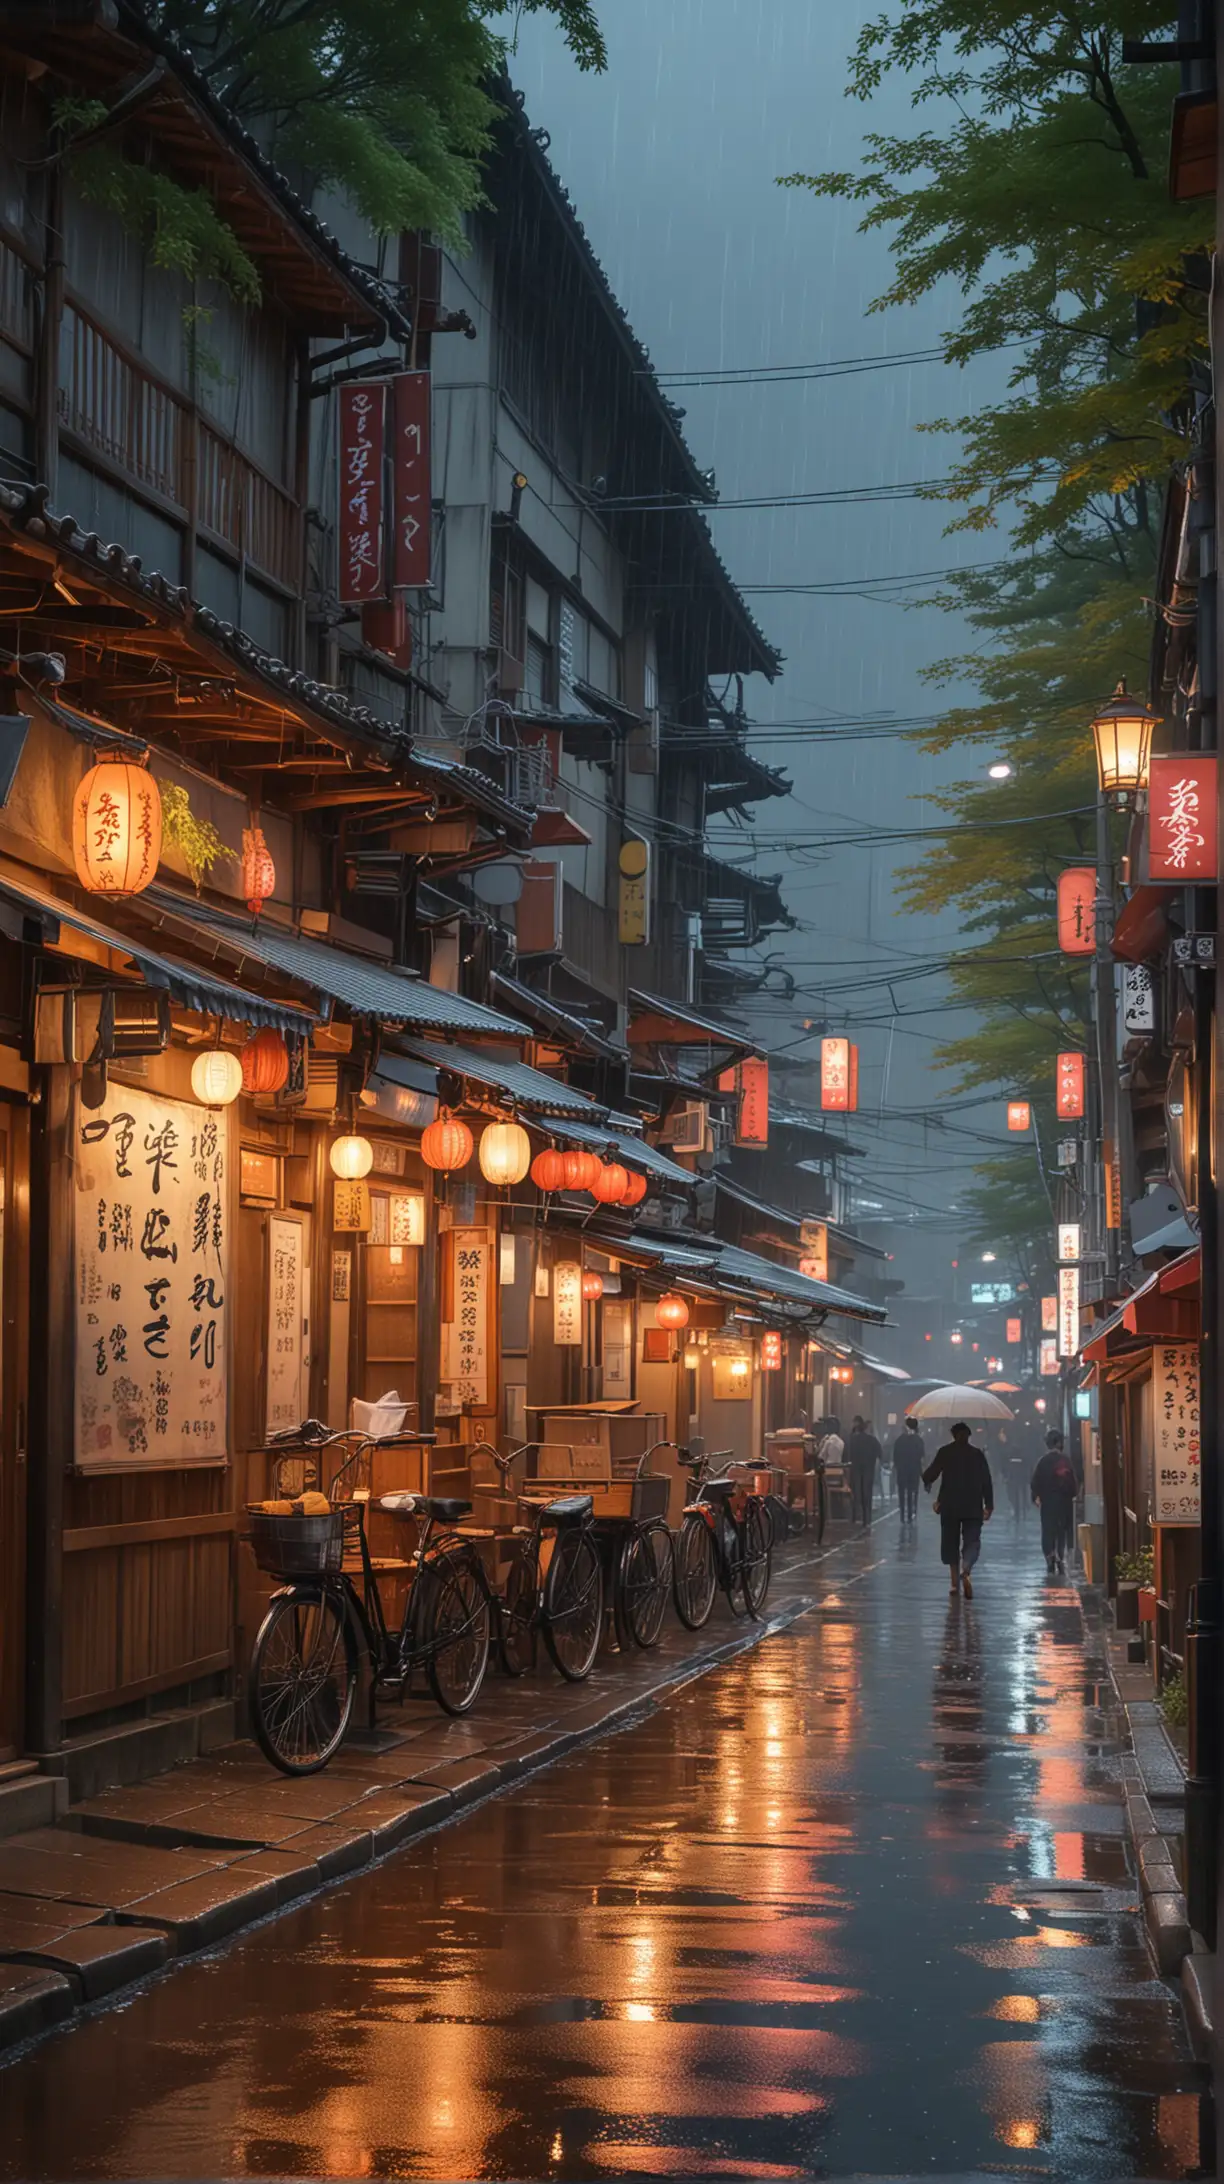 Colorful Rainy Night in Kyoto Vibrant Gang Street Scene with Traditional Restaurants and AnimeInspired Illustration